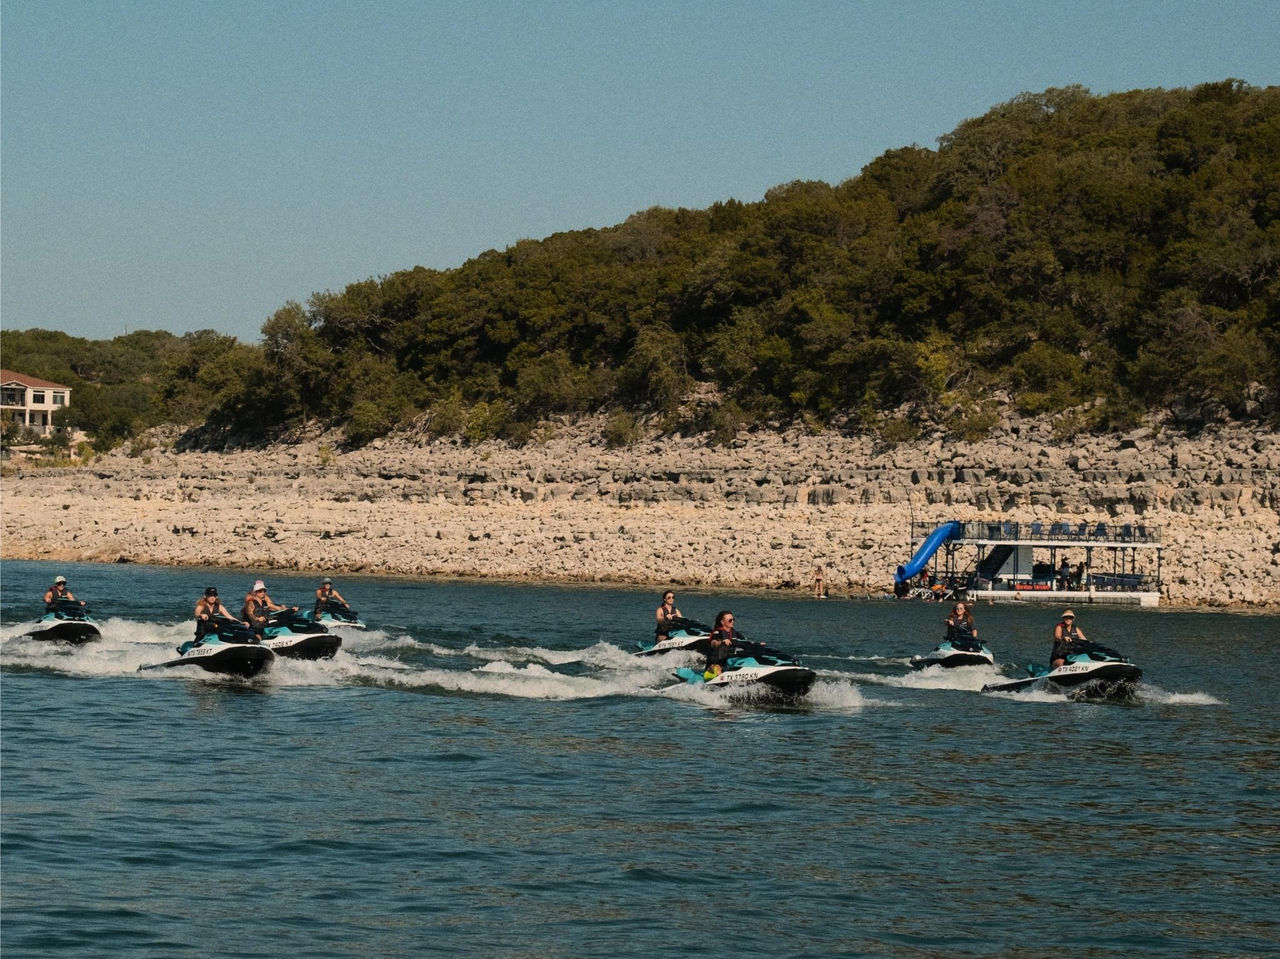 An awesome Sea-Doo tour for women who love speed, in Austin, TX